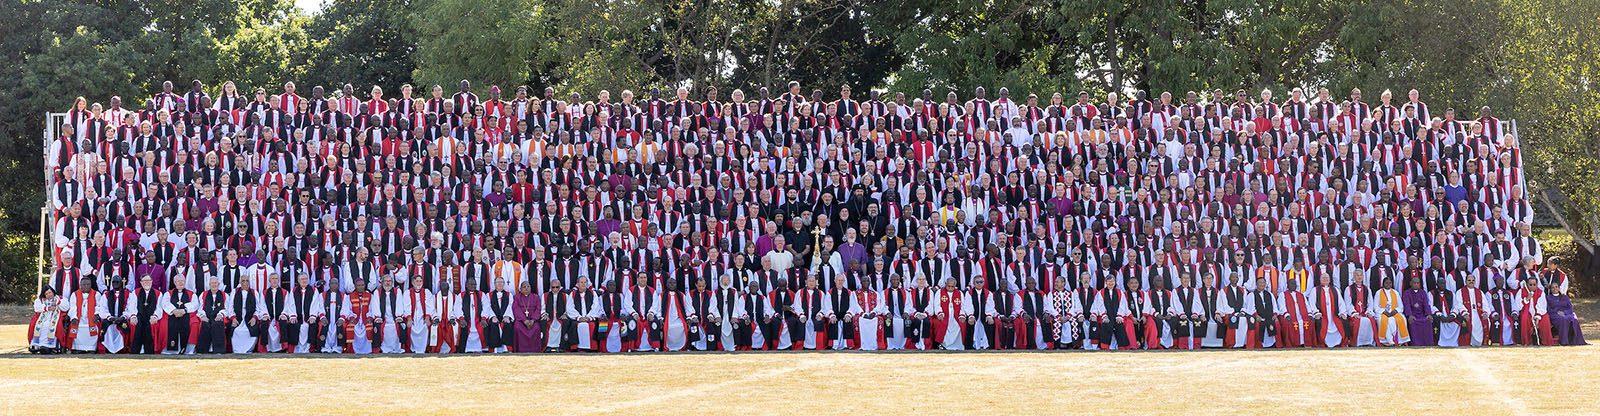 Anglican Bishops attending the Lambeth Conference pose for their group photo during the 2022 Lambeth Conference at the University of Kent in Canterbury, England on Friday July 29, 2022. Photo by Neil Turner for the Lambeth Conference